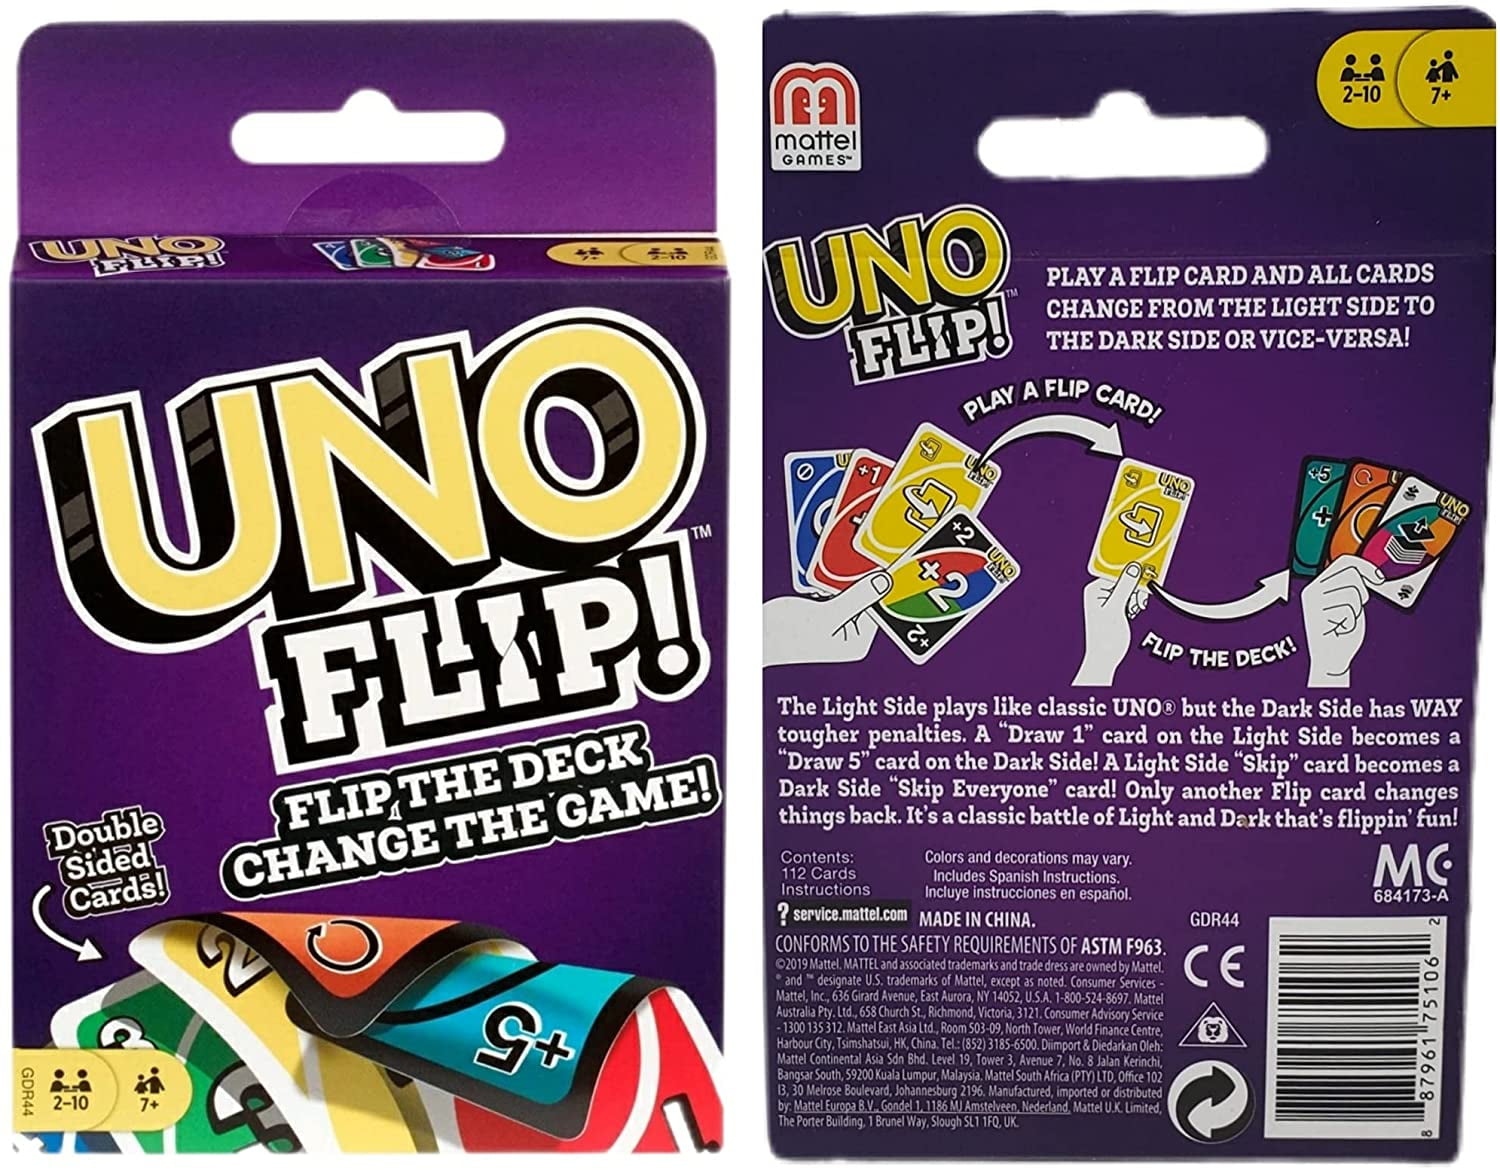 Mattel Family Card Game Variety Pack - 4 Card Game Bundle - Uno, Dos, Uno  Flip, and Phase 10 - Ultimate Family Game Night Card Bundle